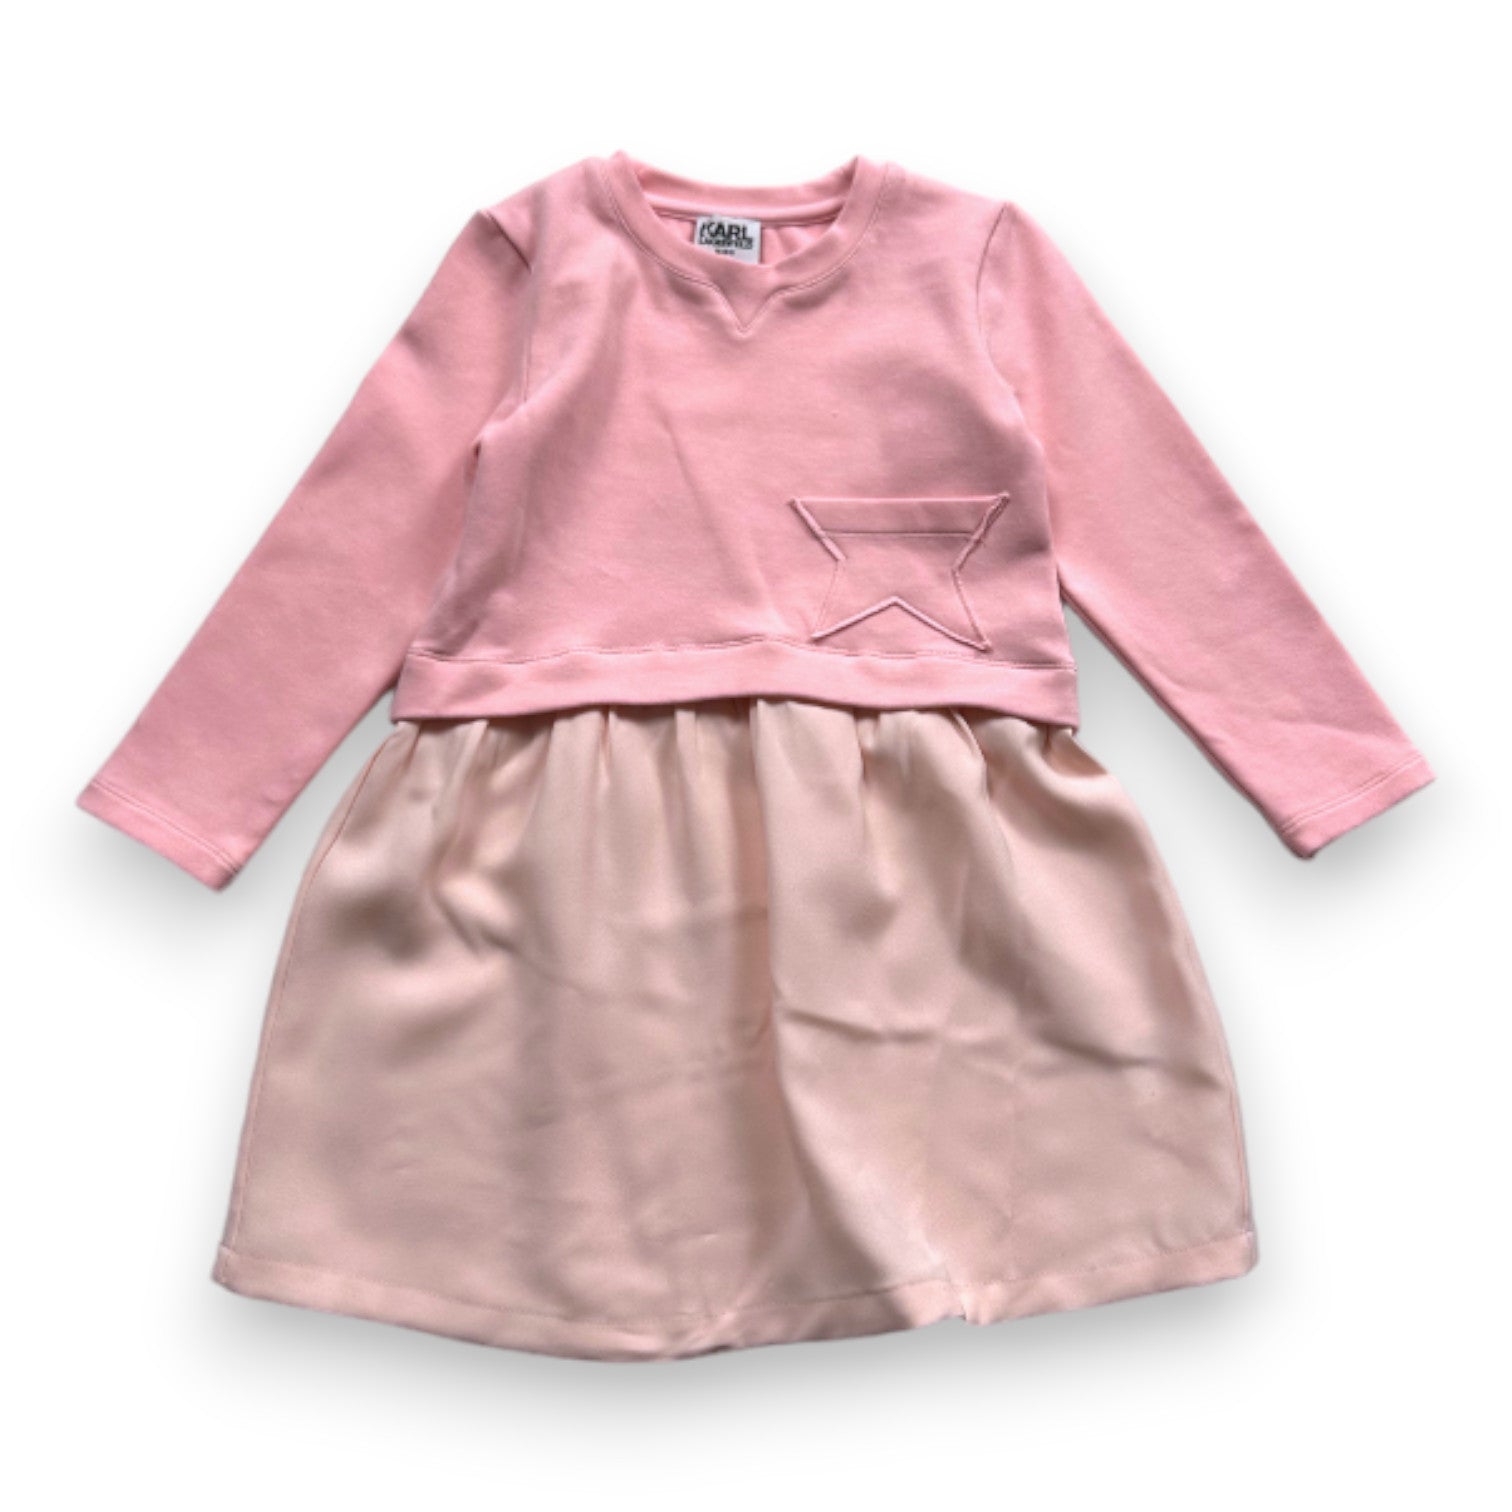 KARL LAGERFELD - Robe rose à manches longues - 3 ans